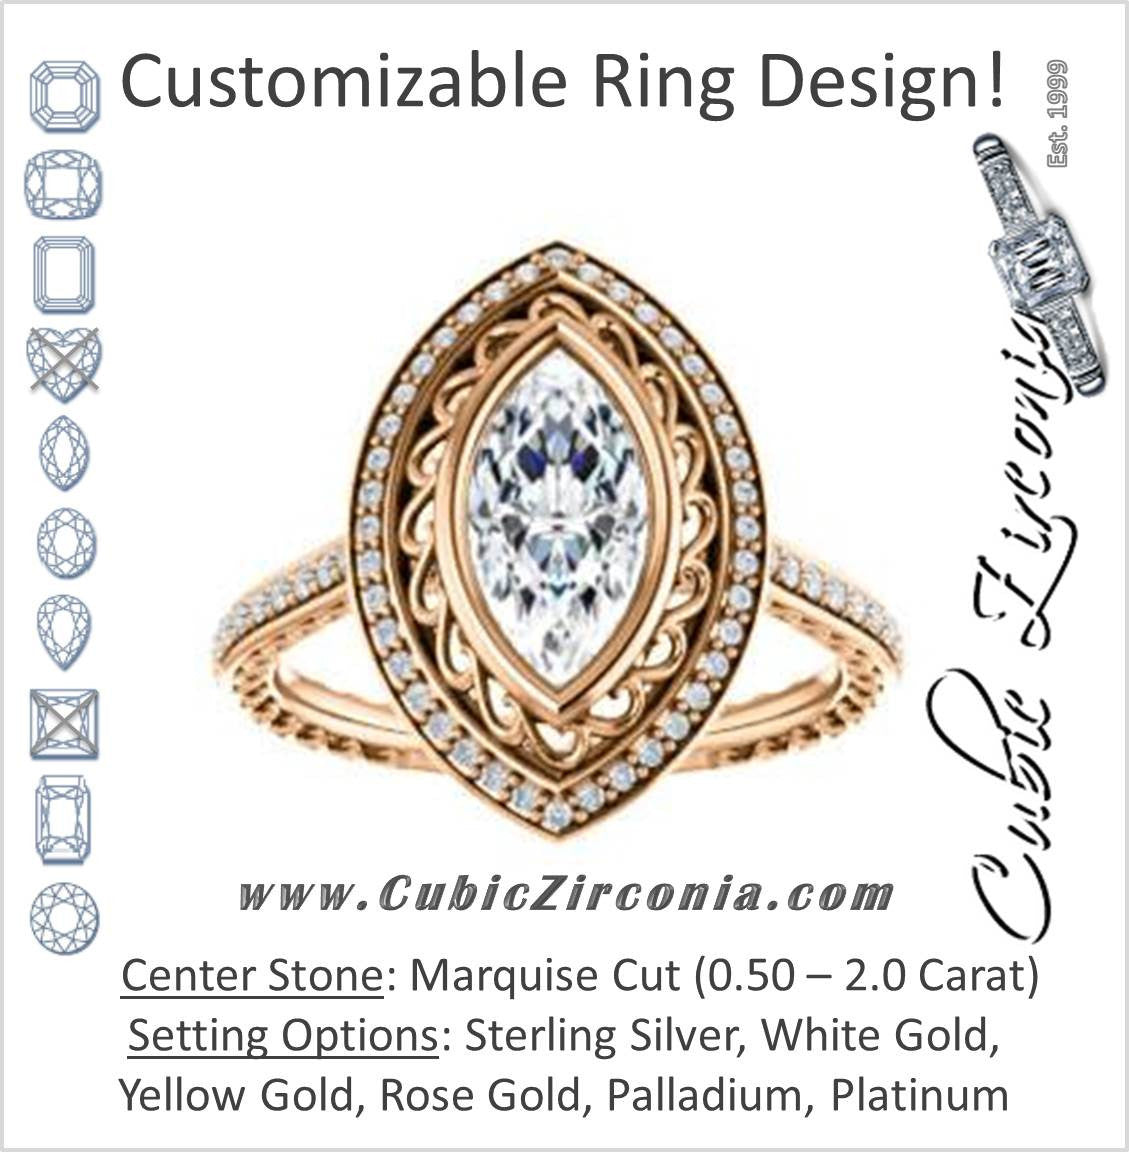 Cubic Zirconia Engagement Ring- The Sydney Ava (Customizable Cathedral-Bezel Marquise Cut Filigreed Design with Halo & Pavé Accents)